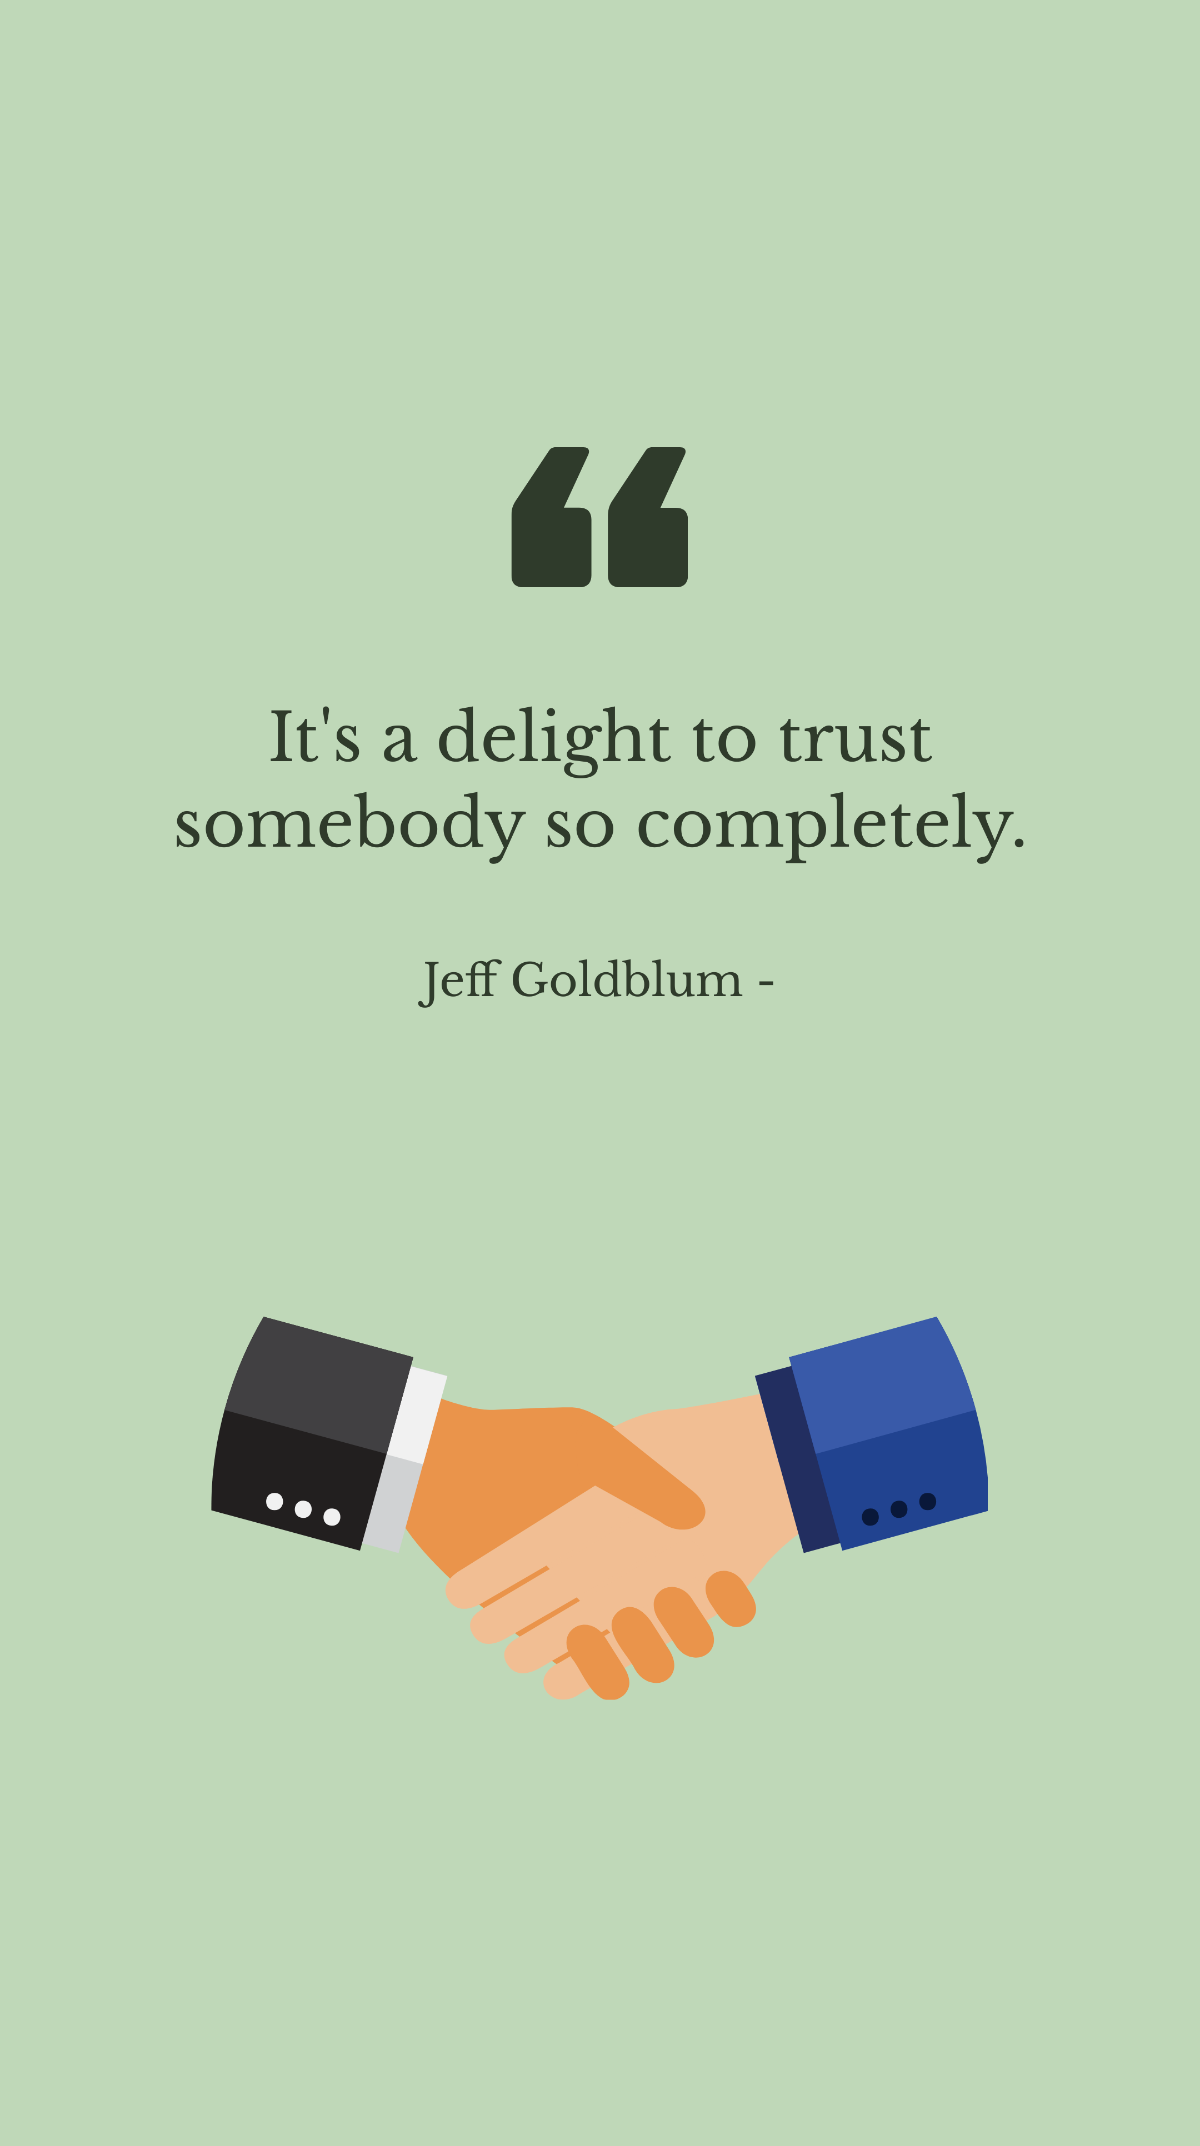 Jeff Goldblum - It's a delight to trust somebody so completely.